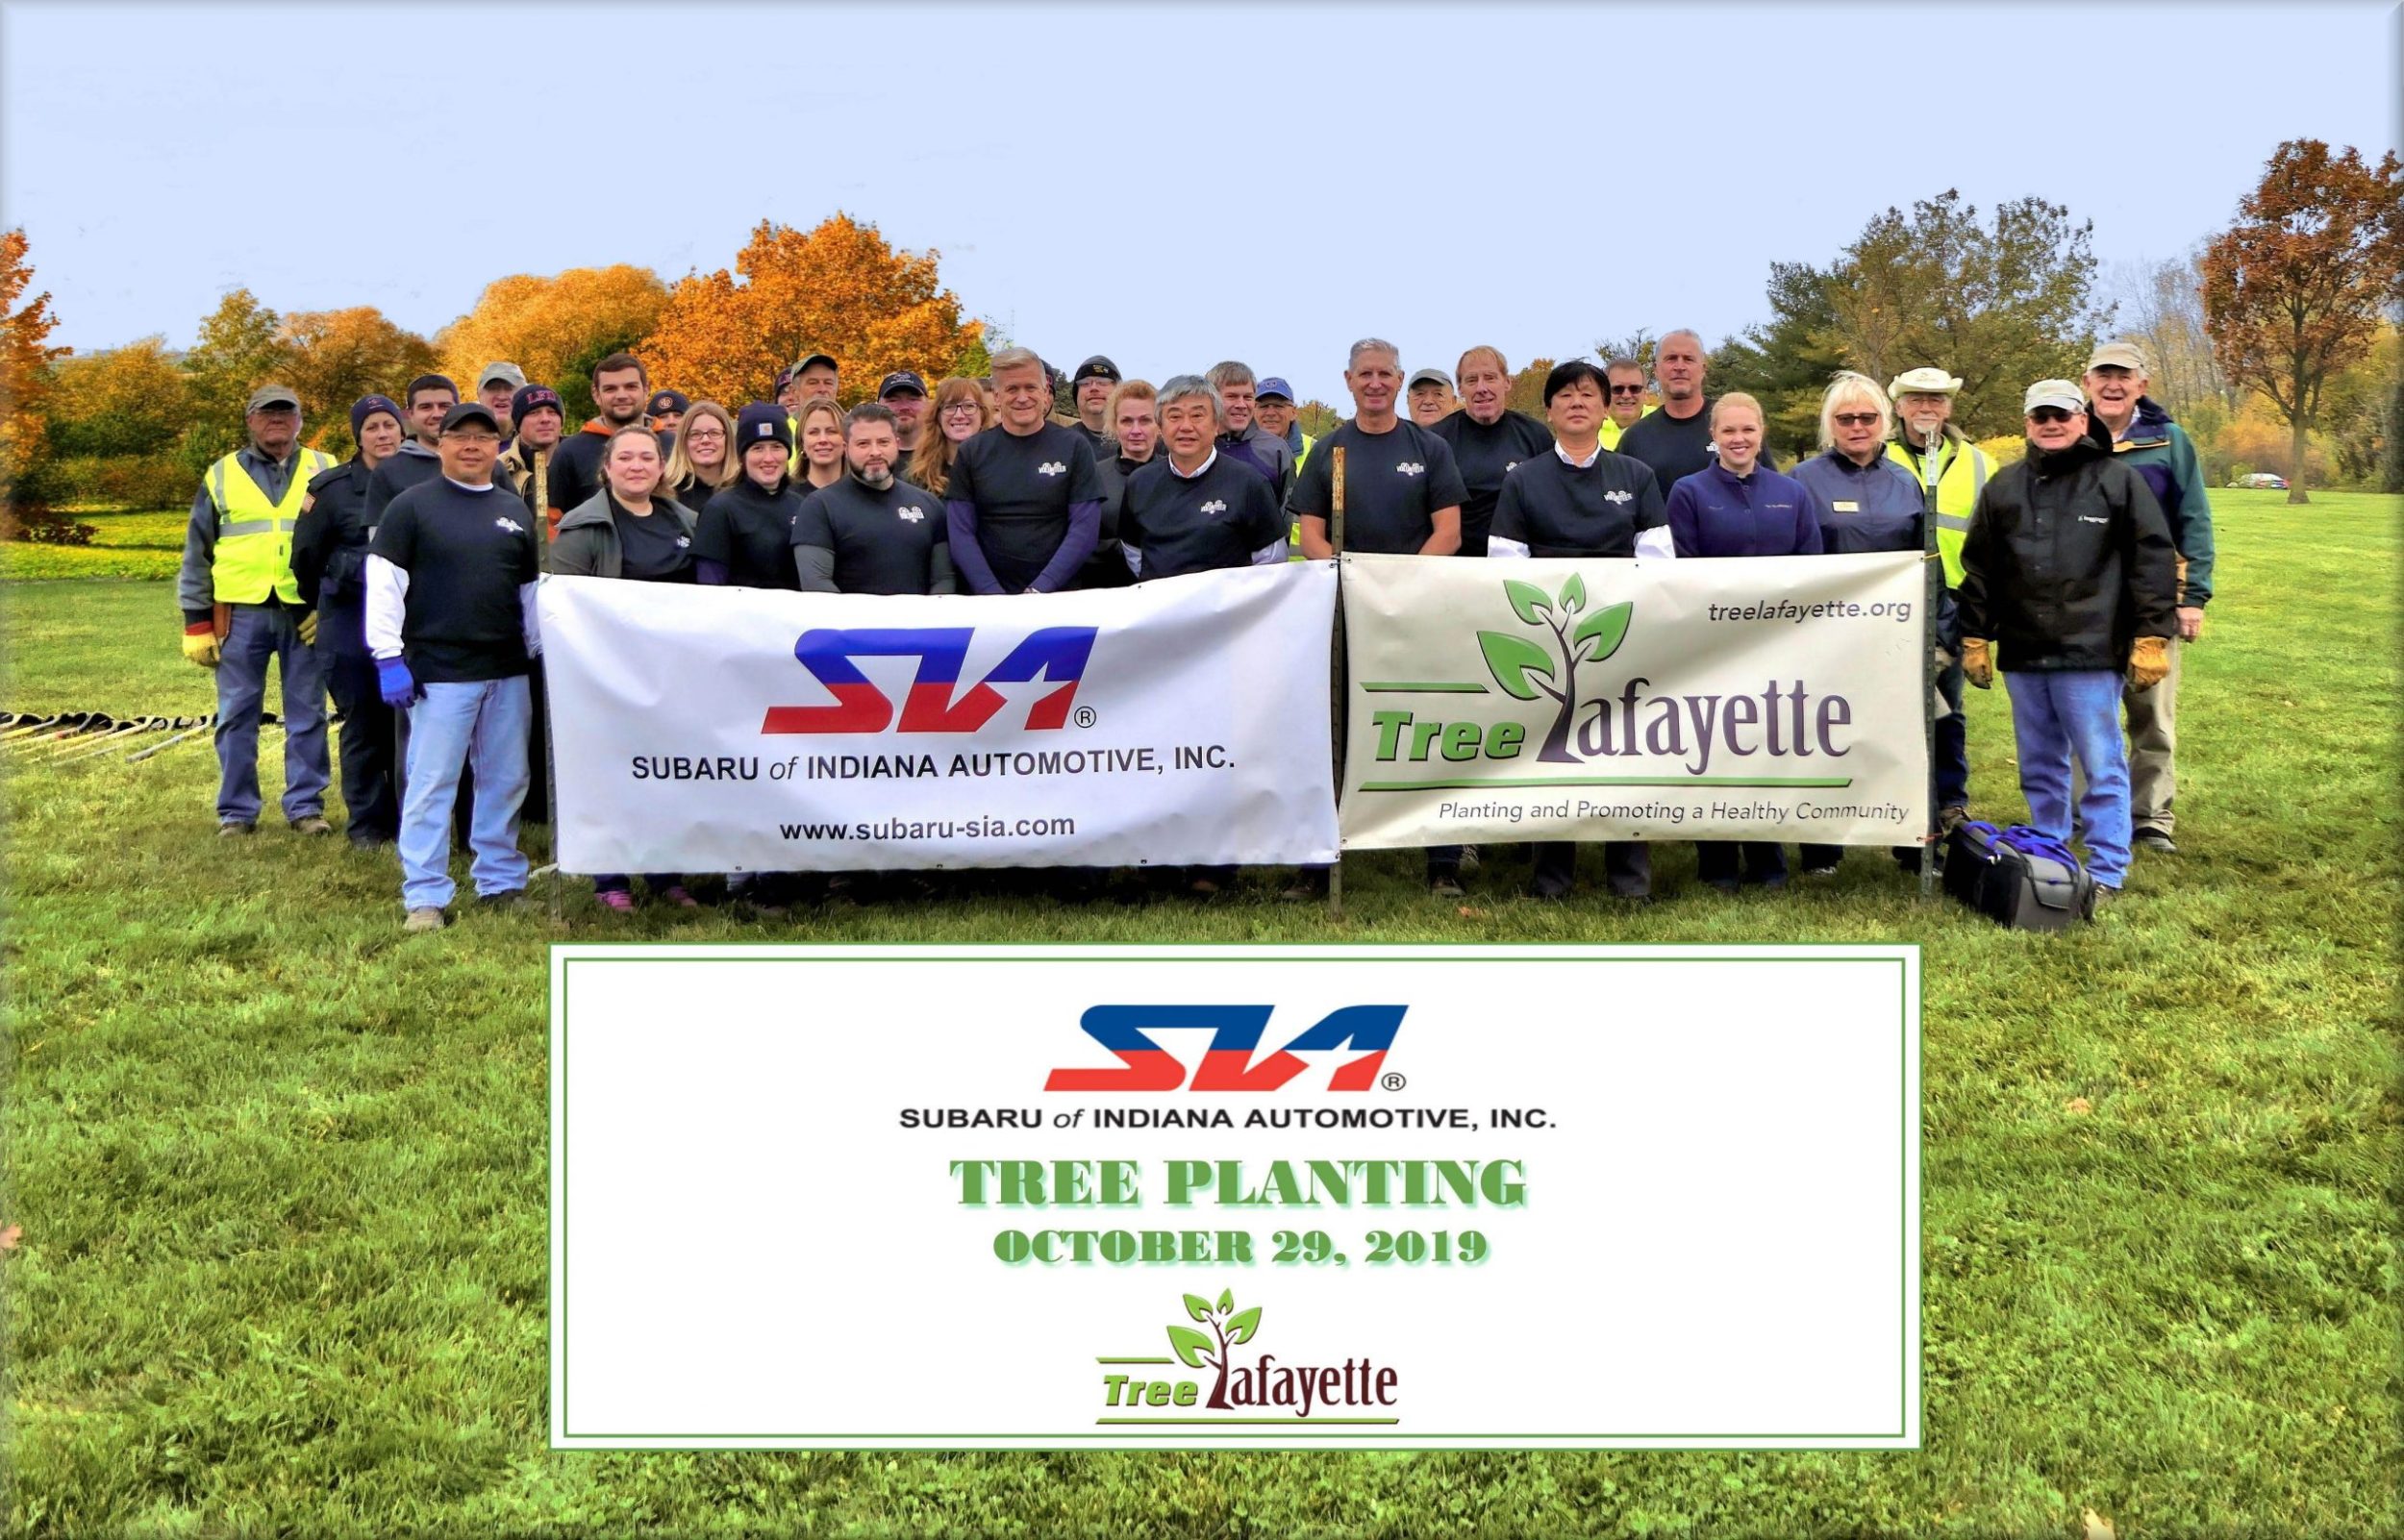 Fire Station tree planting picture